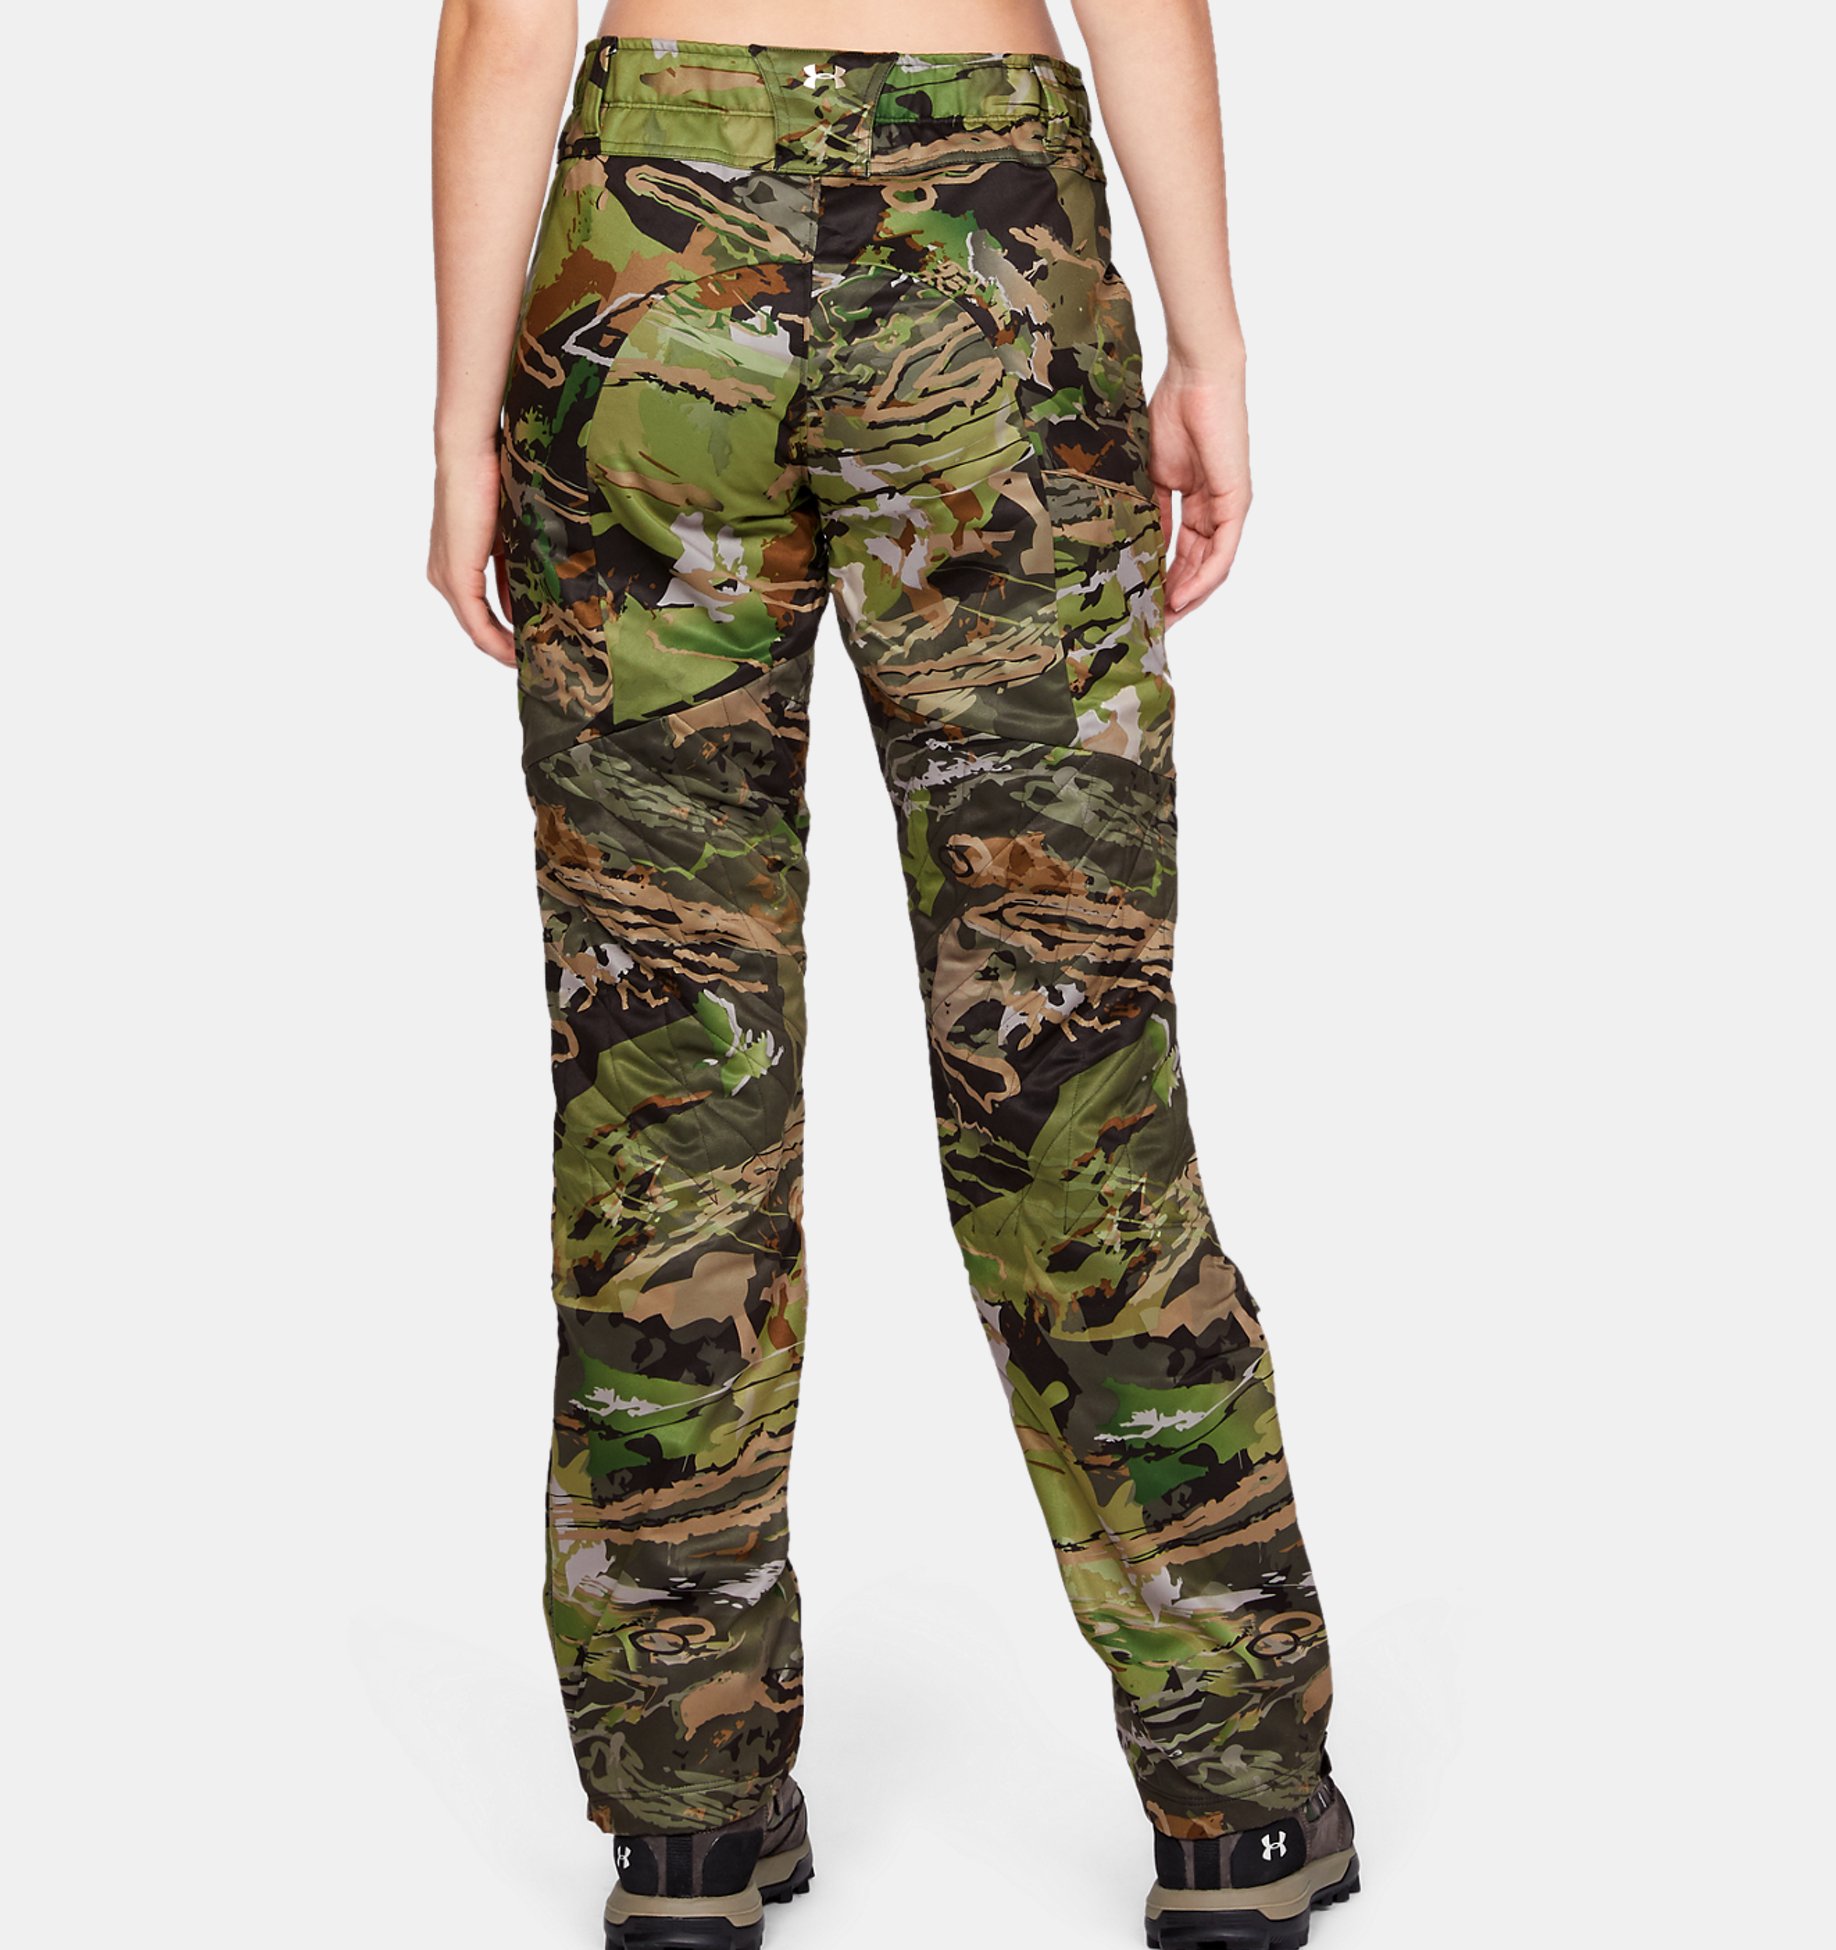 NWT $150 Under Armour Women's Storm Mid Season Brow Tine Fitted Pants Camo Hunt 